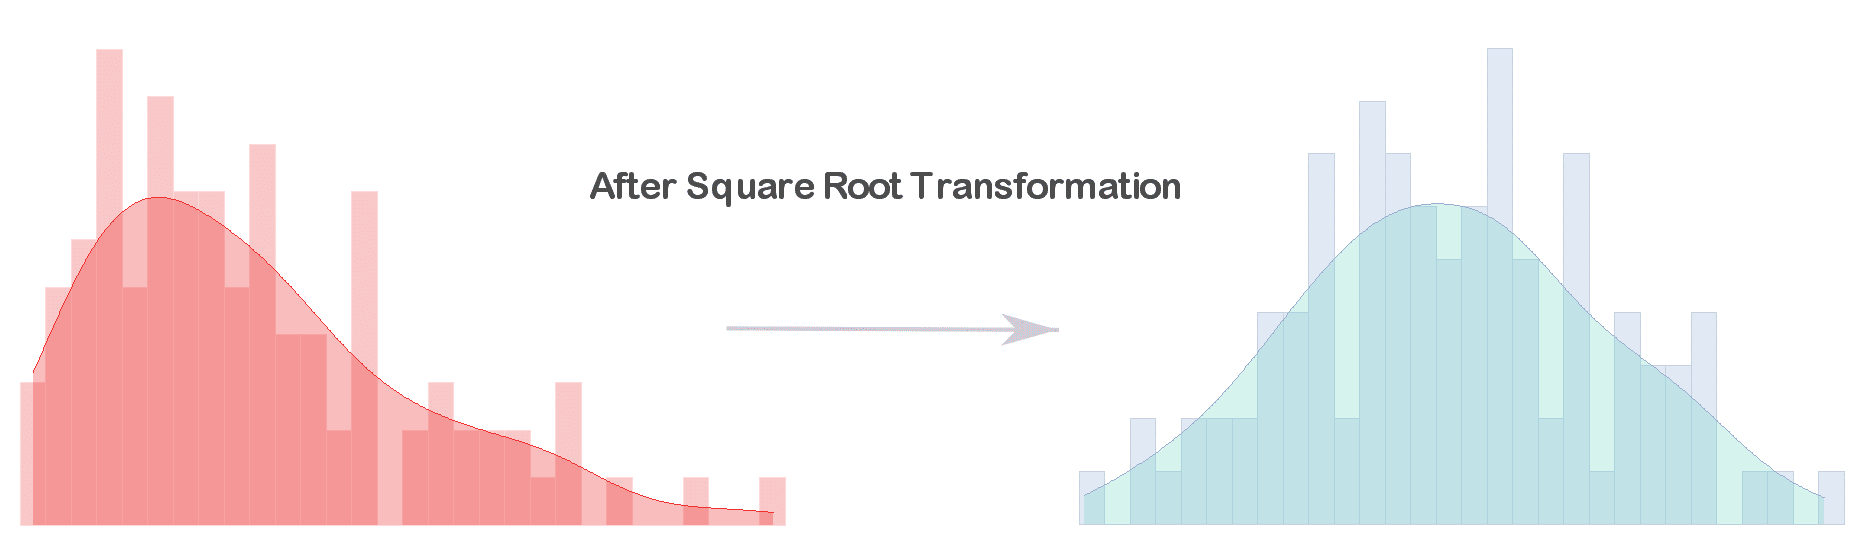 Normalizing a distribution with a square root transformation